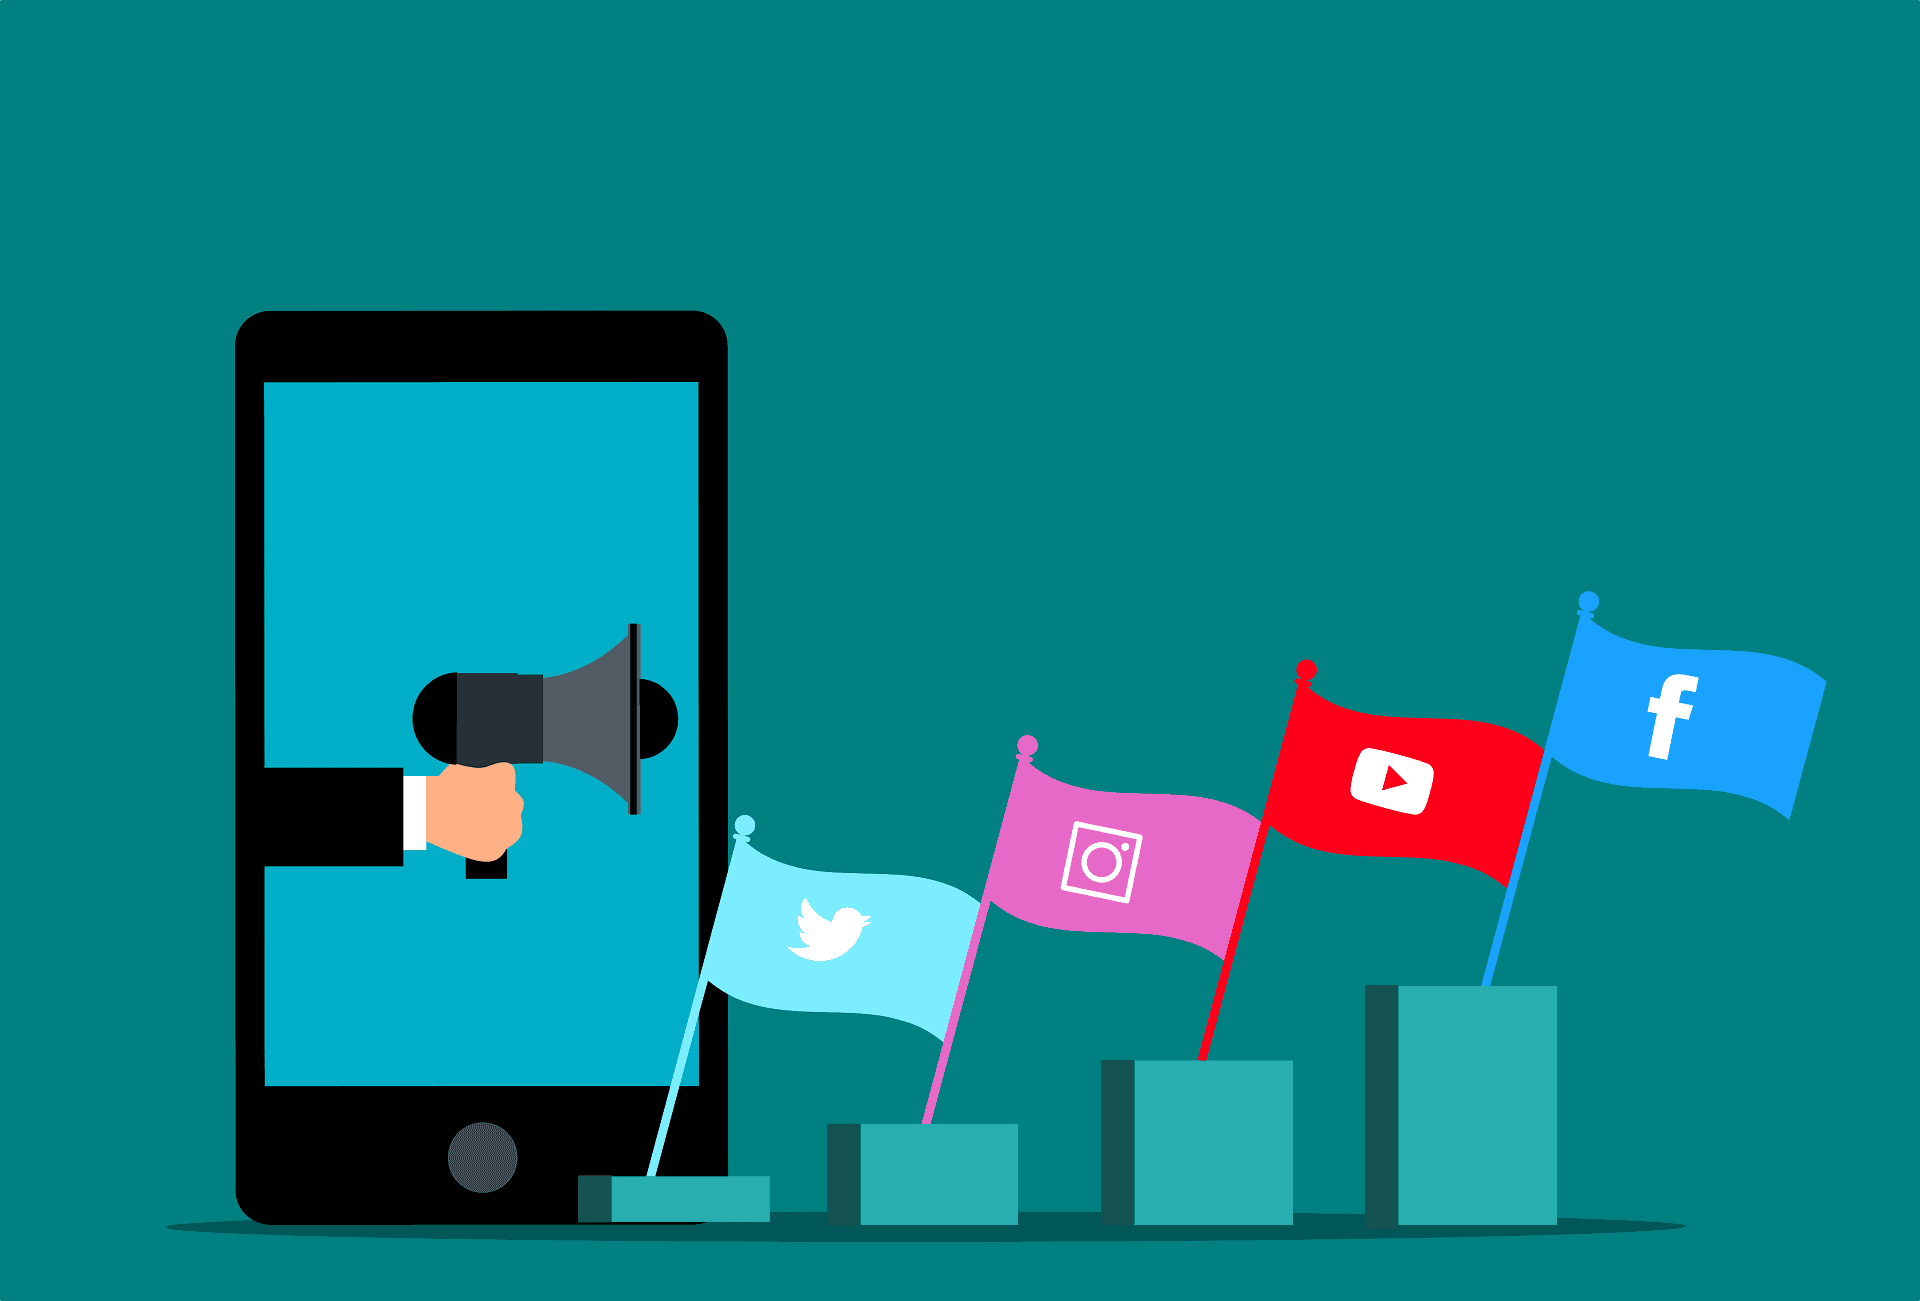 An image showing various social media platforms, symbolizing the diverse opportunities for advertising and audience engagement.